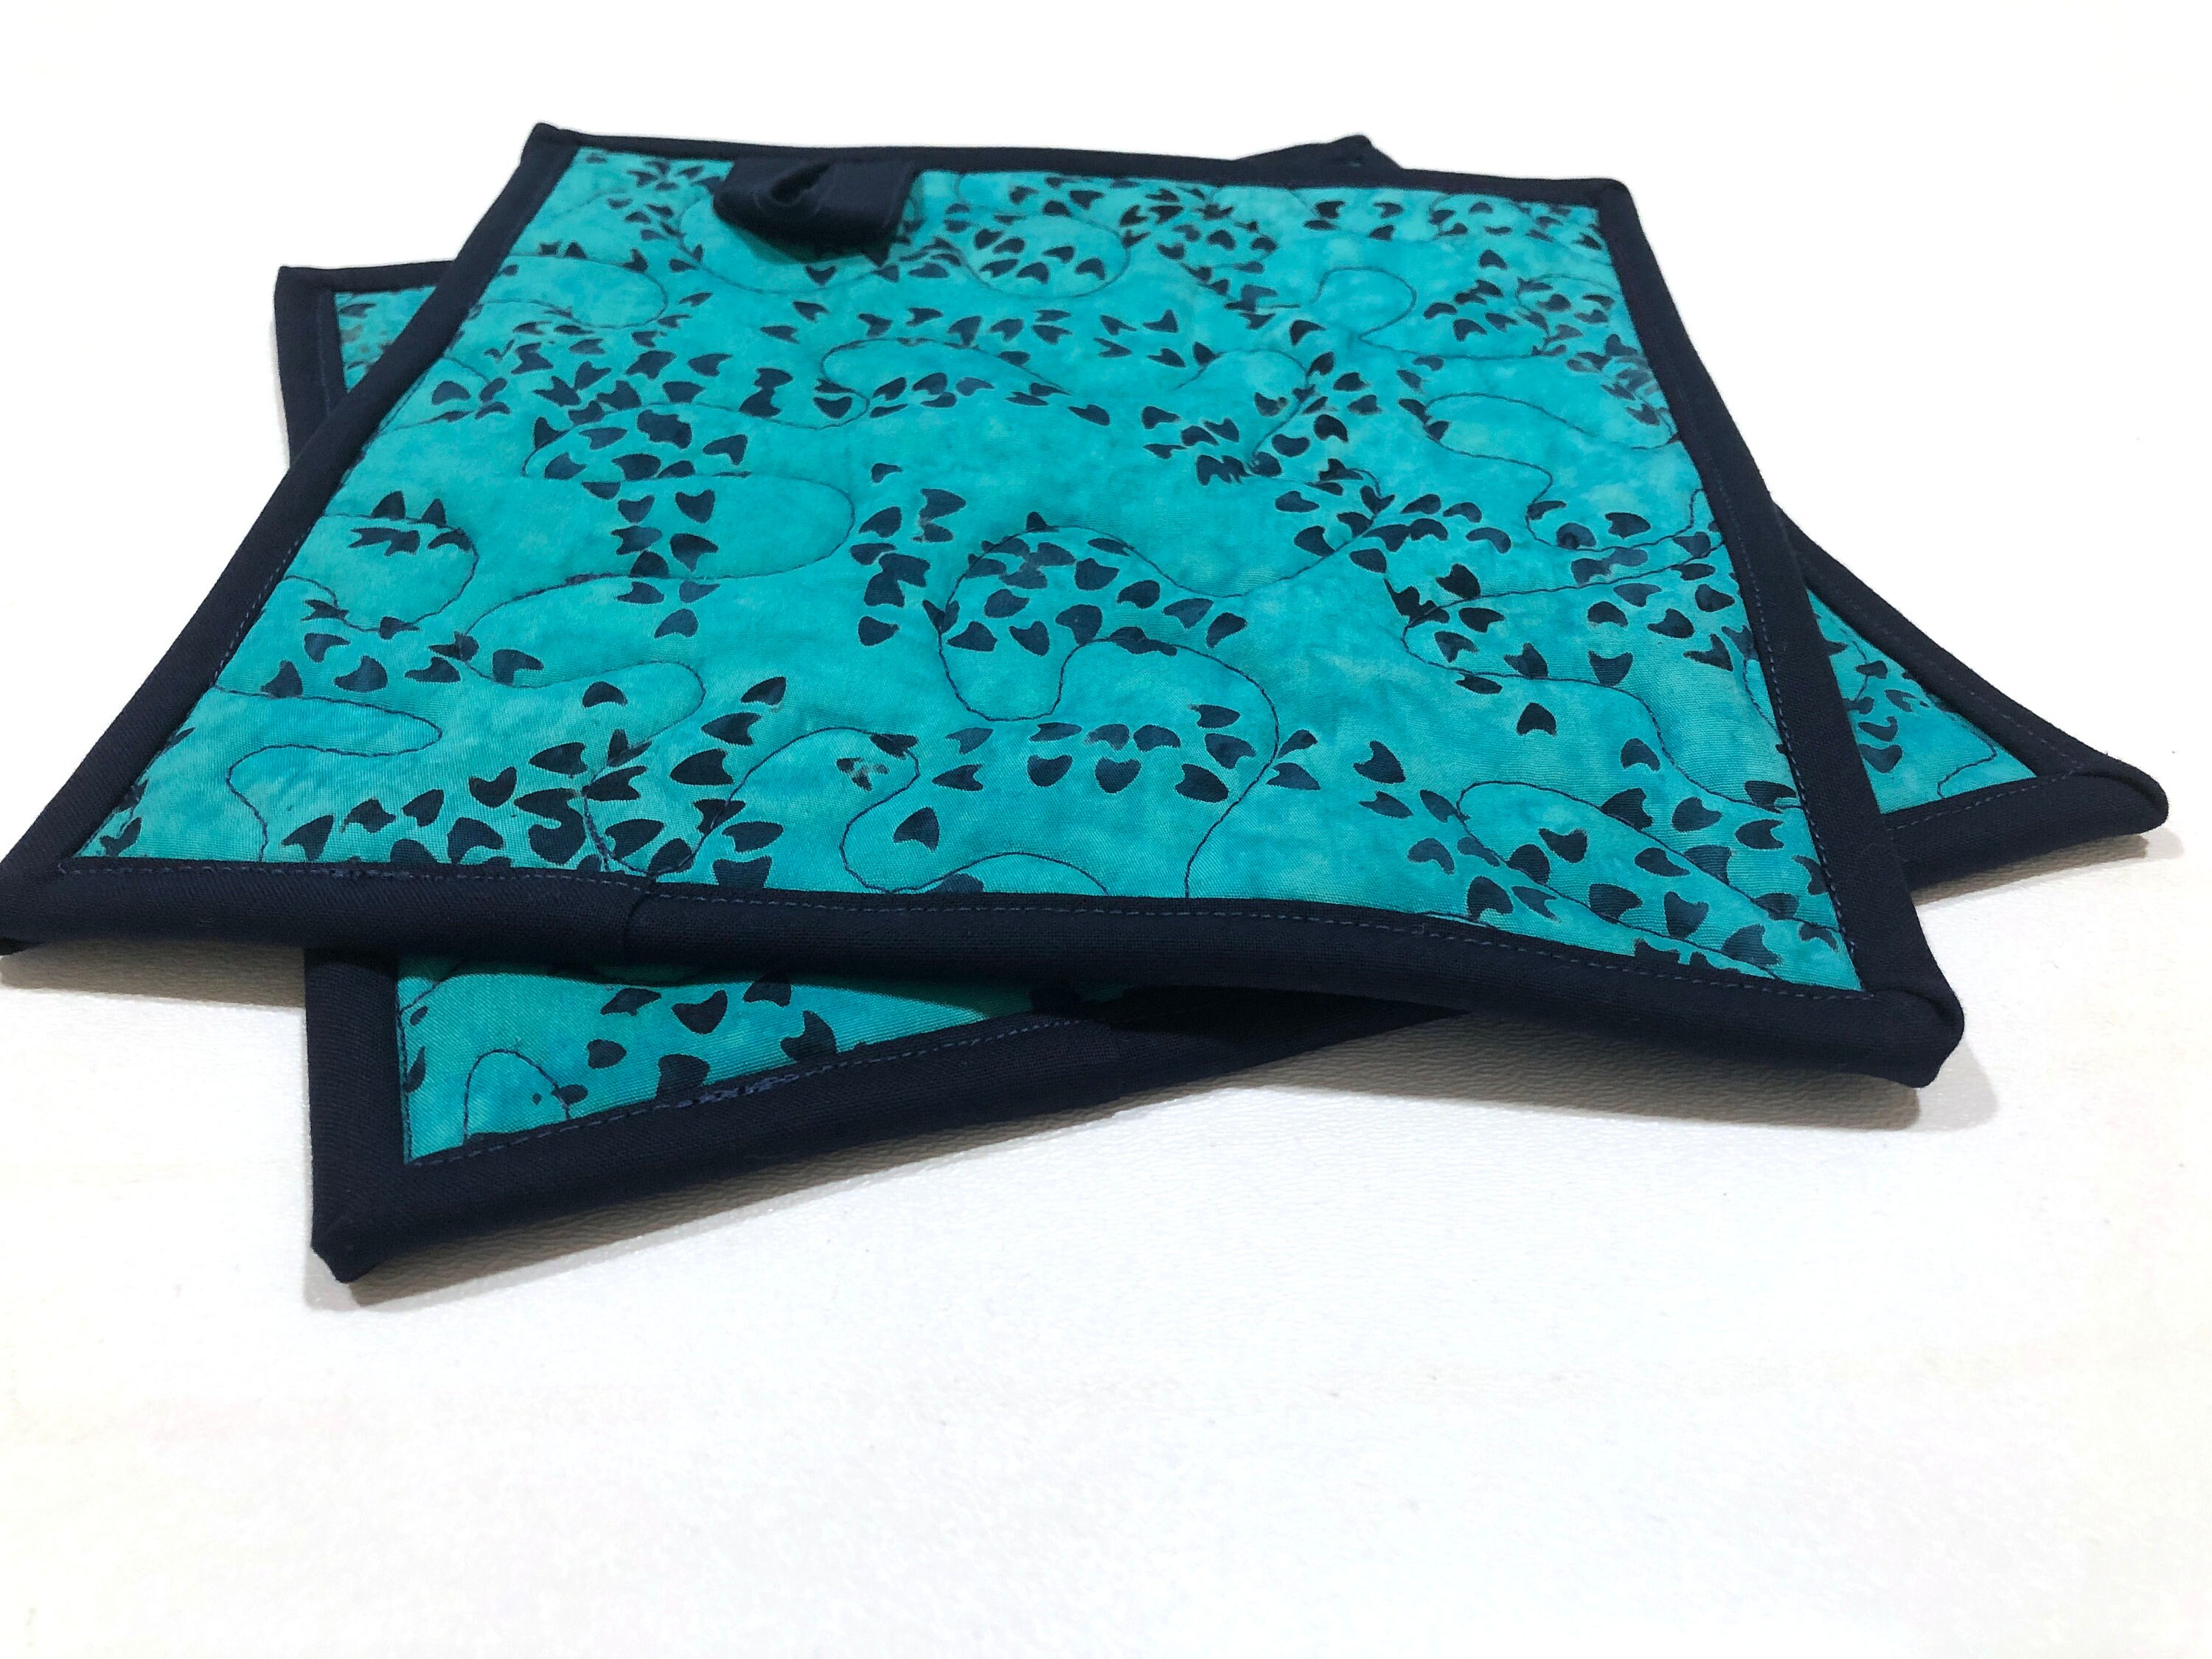 Hand Dyed Quilted Batik Fabric Pot Holders with Eclectic Teal Blue